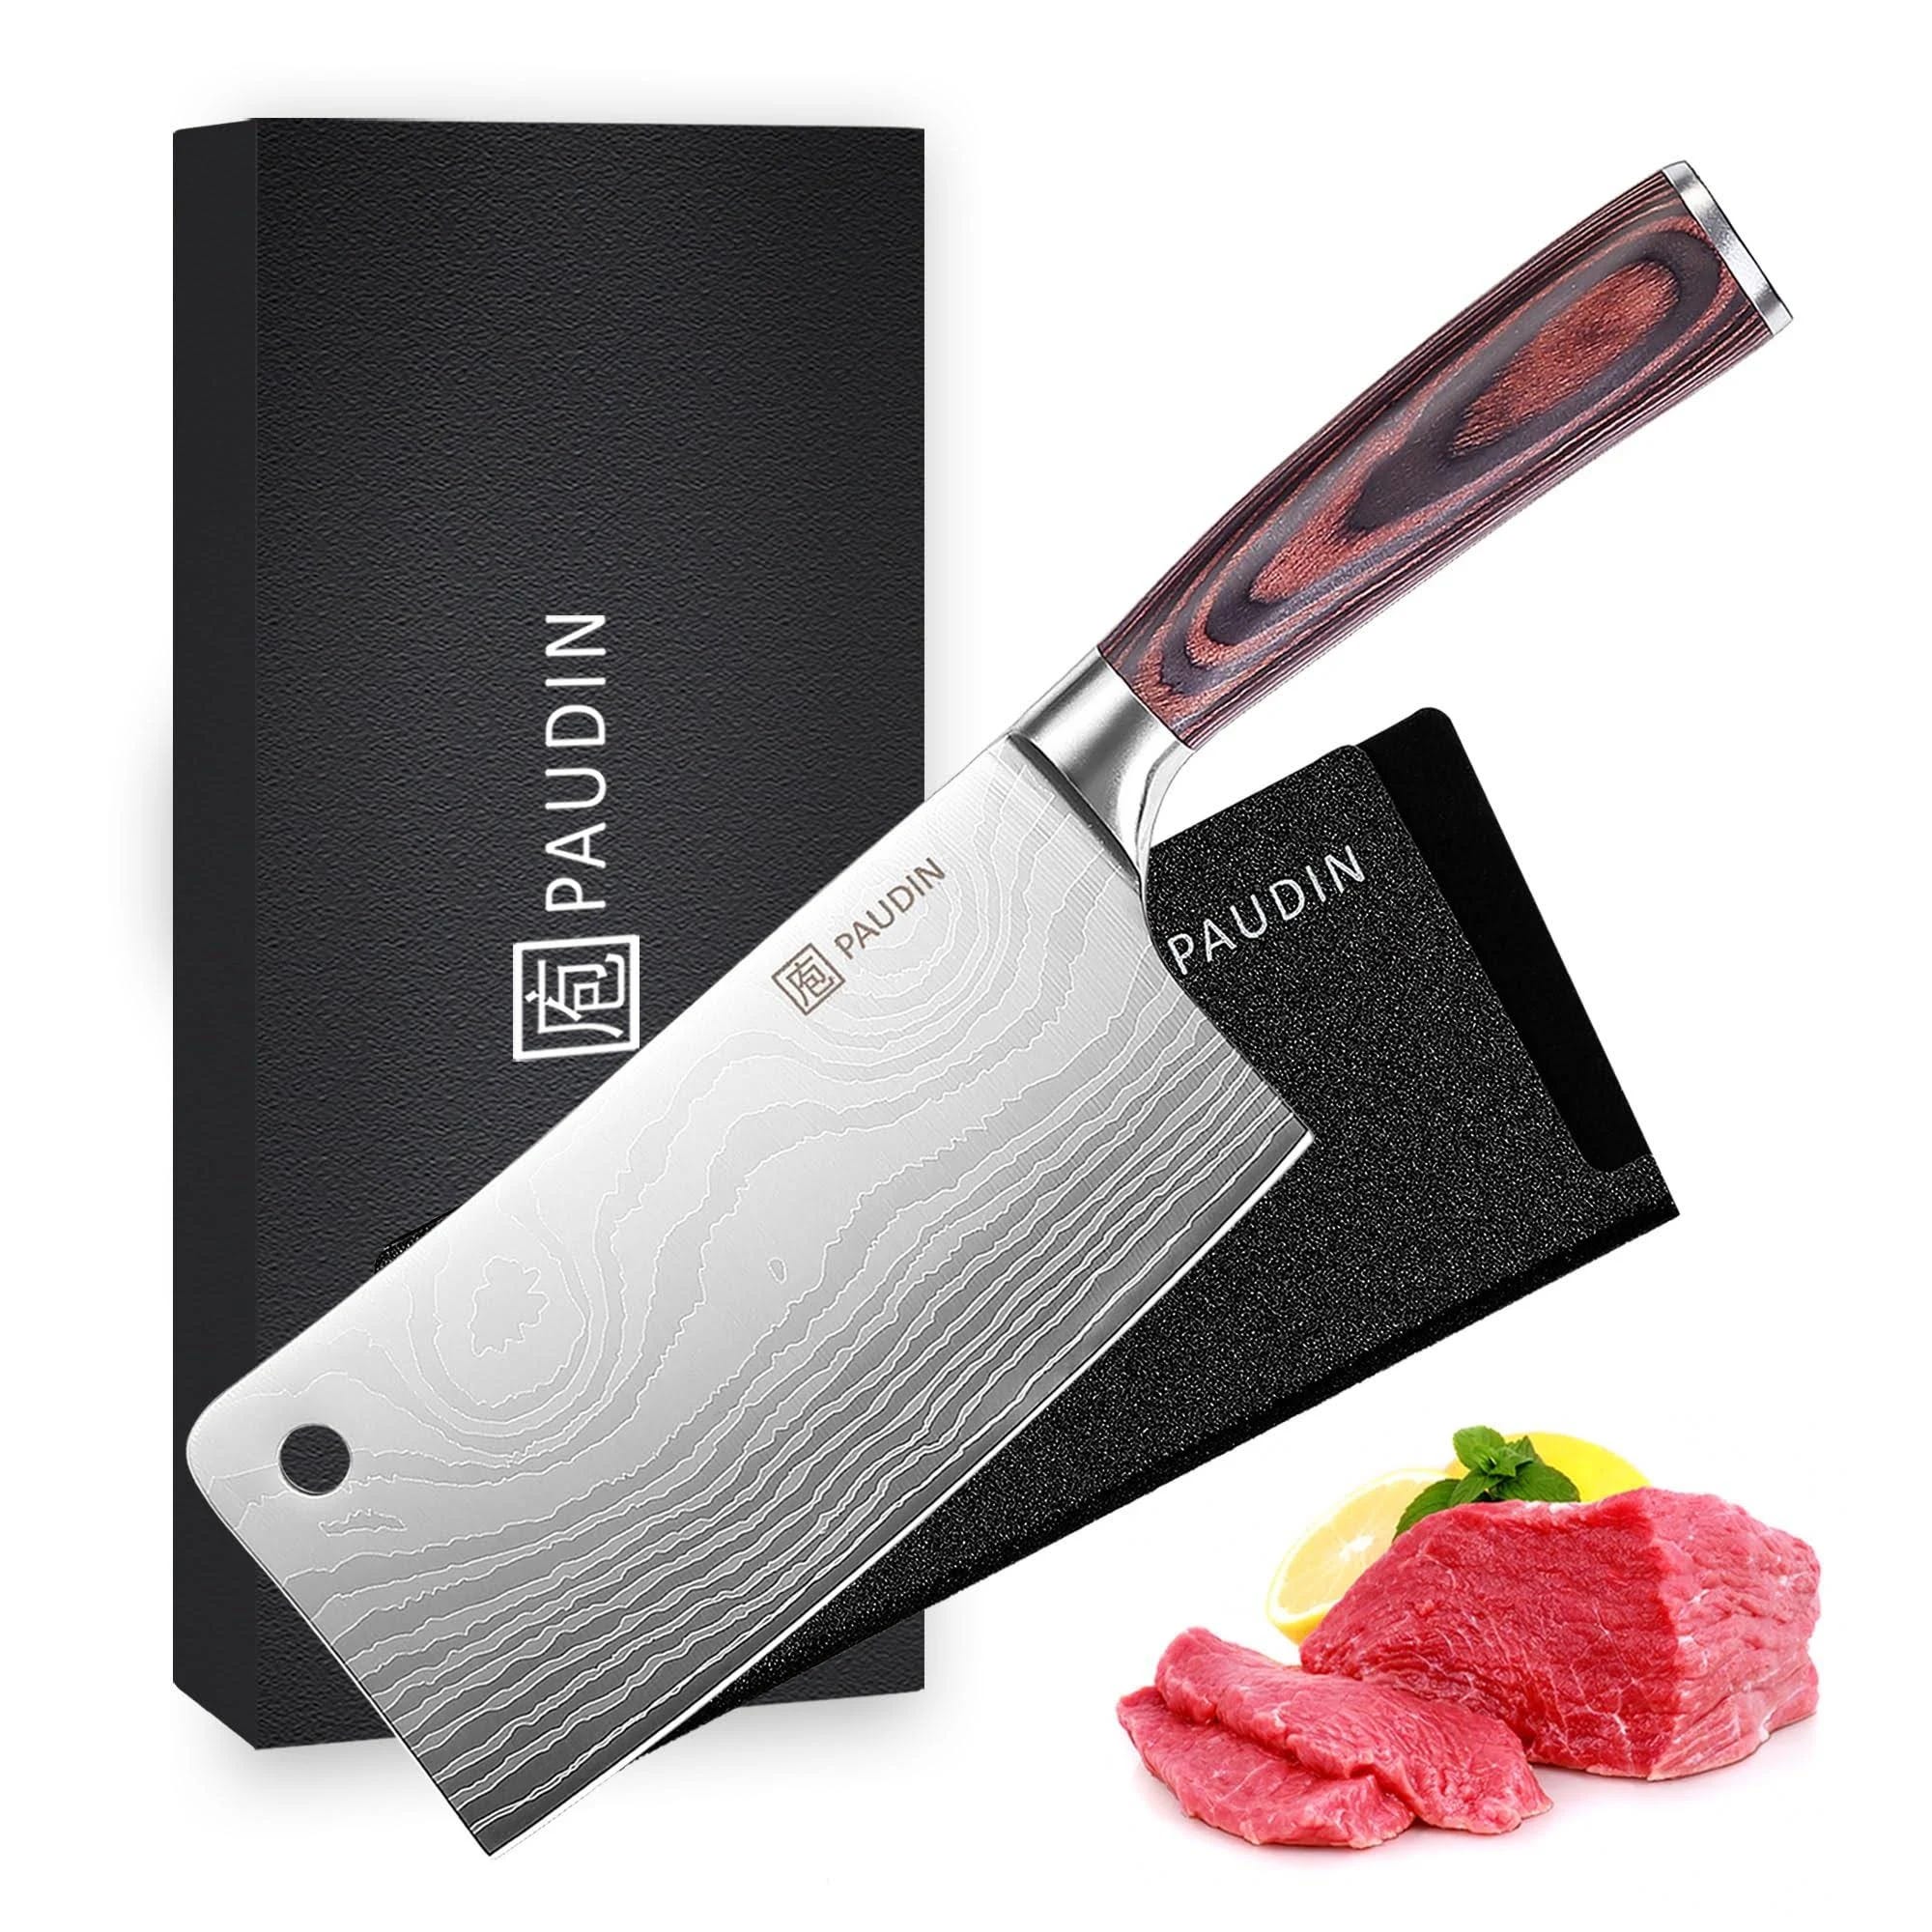 PAUDIN's Professional 7-inch Meat Cleaver: Ultra Sharp and Versatile Kitchen Tool | Image